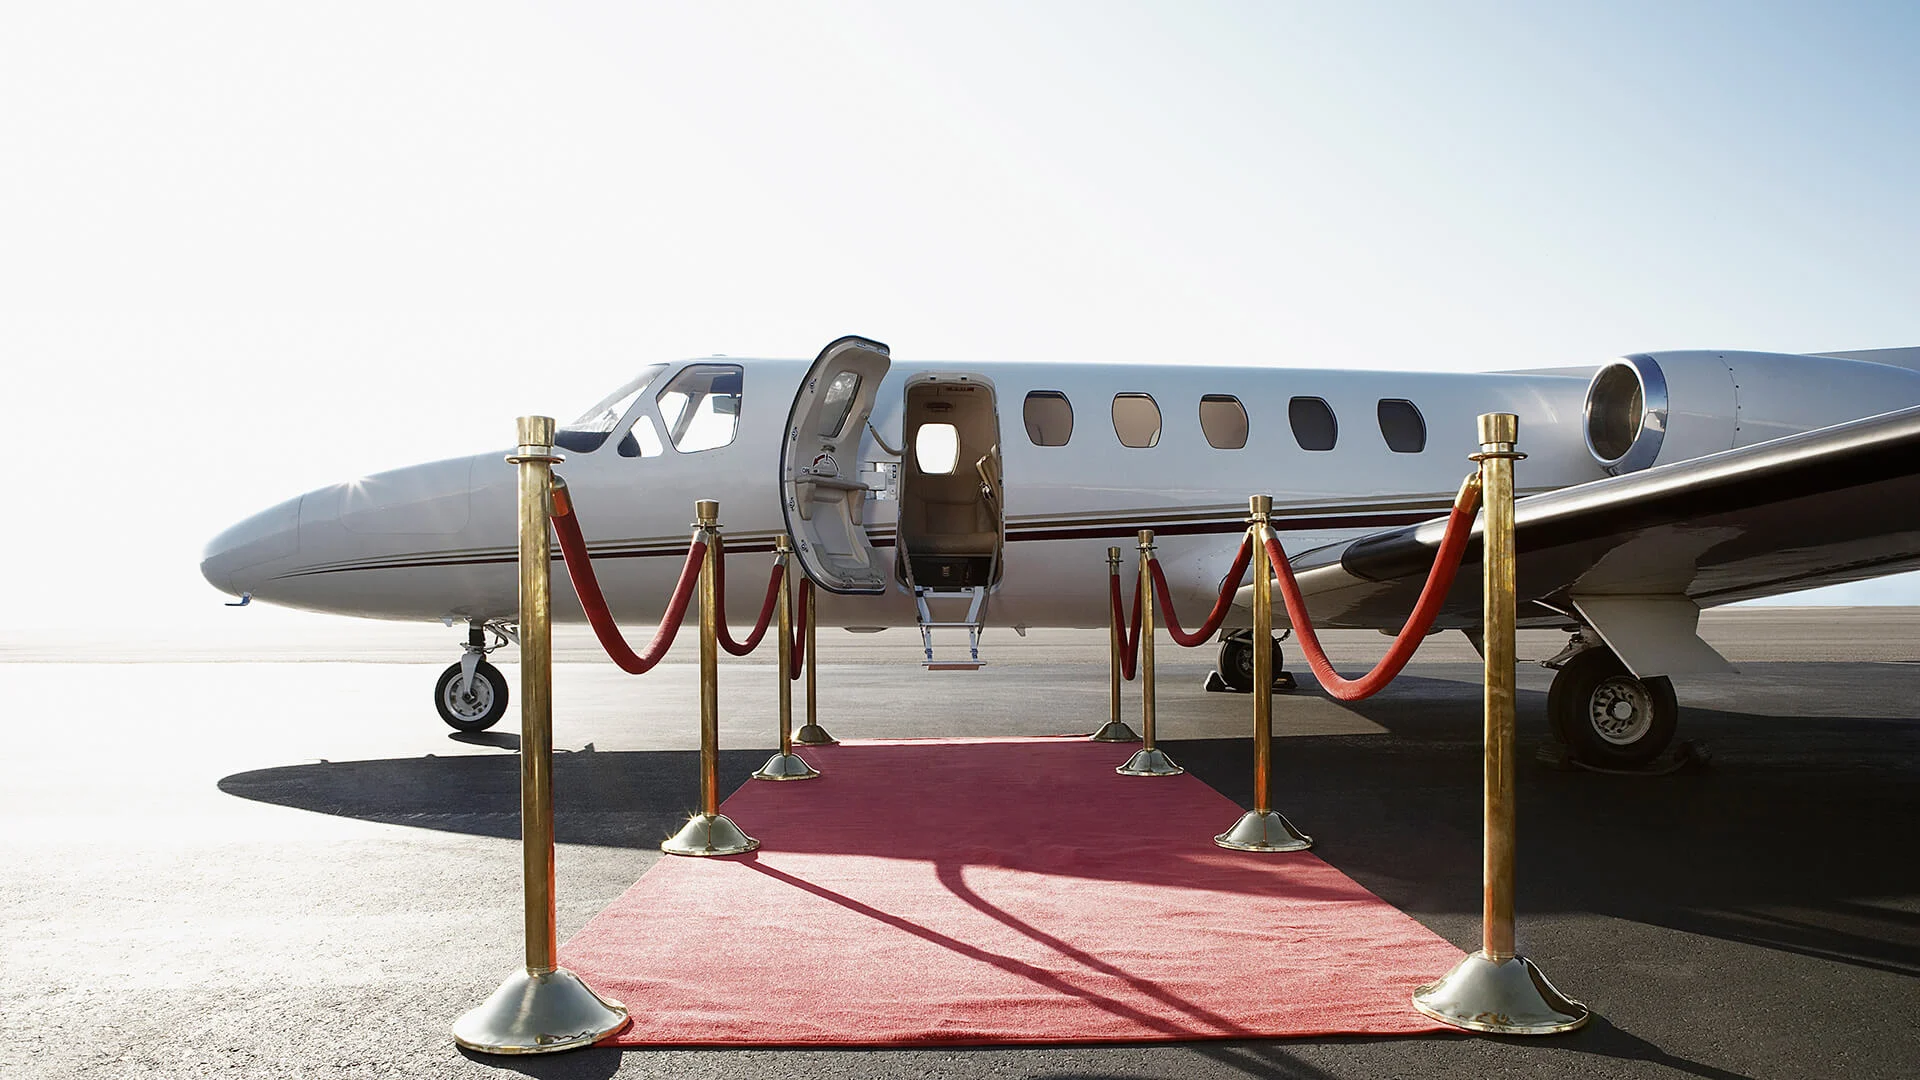 Flight shaming celebrity jet-setting probably won’t work. Here’s what can